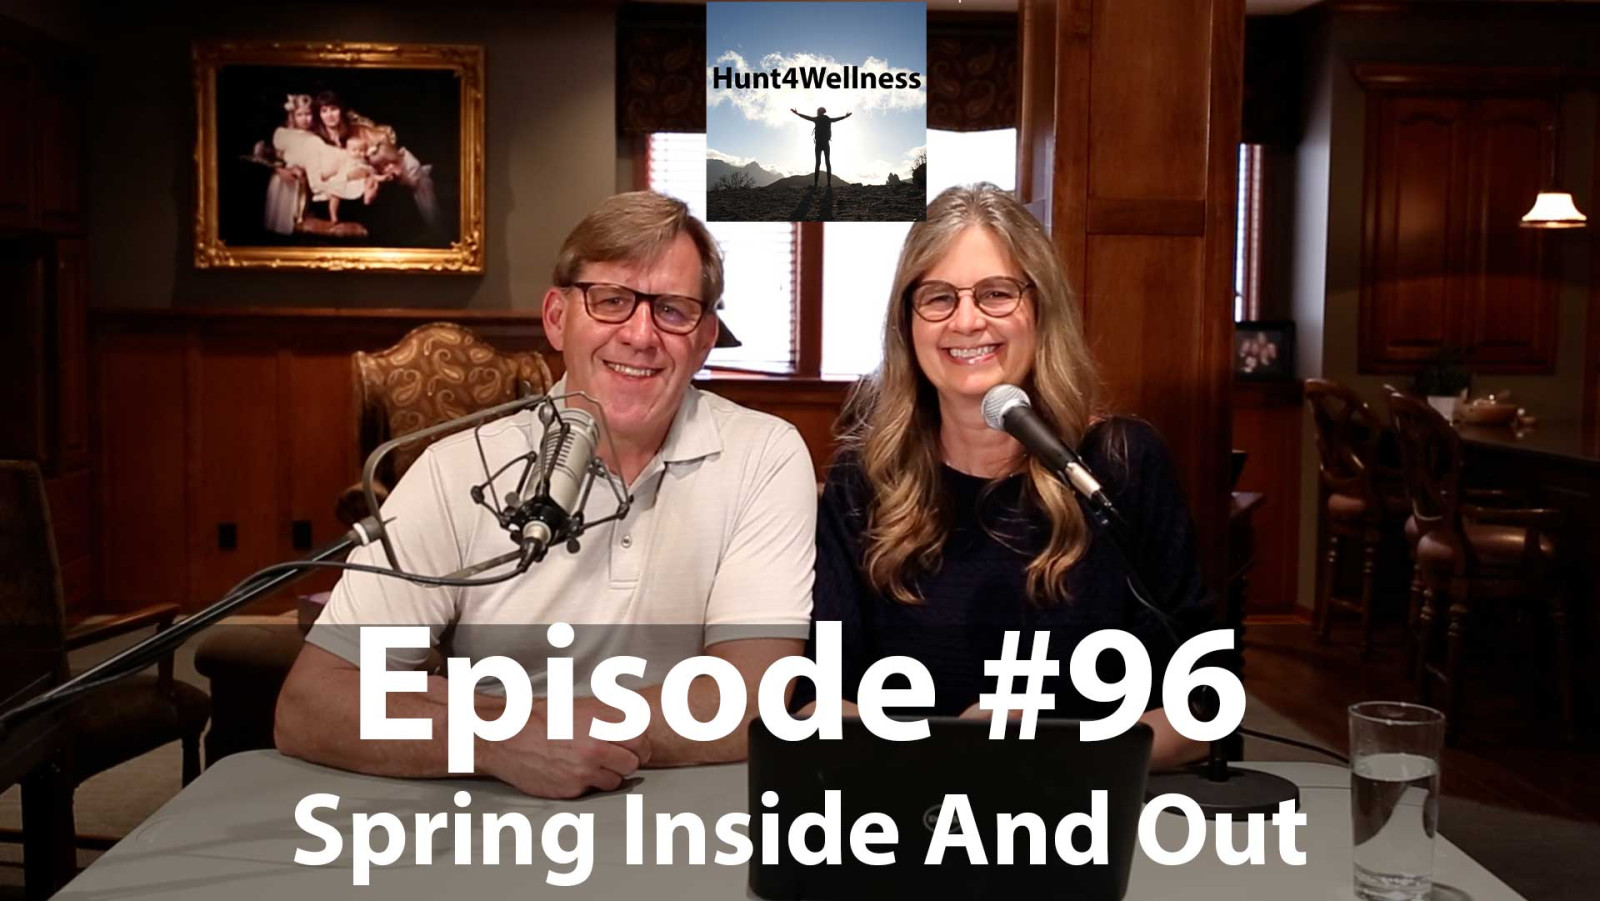 Episode #96 - Spring Inside And Out